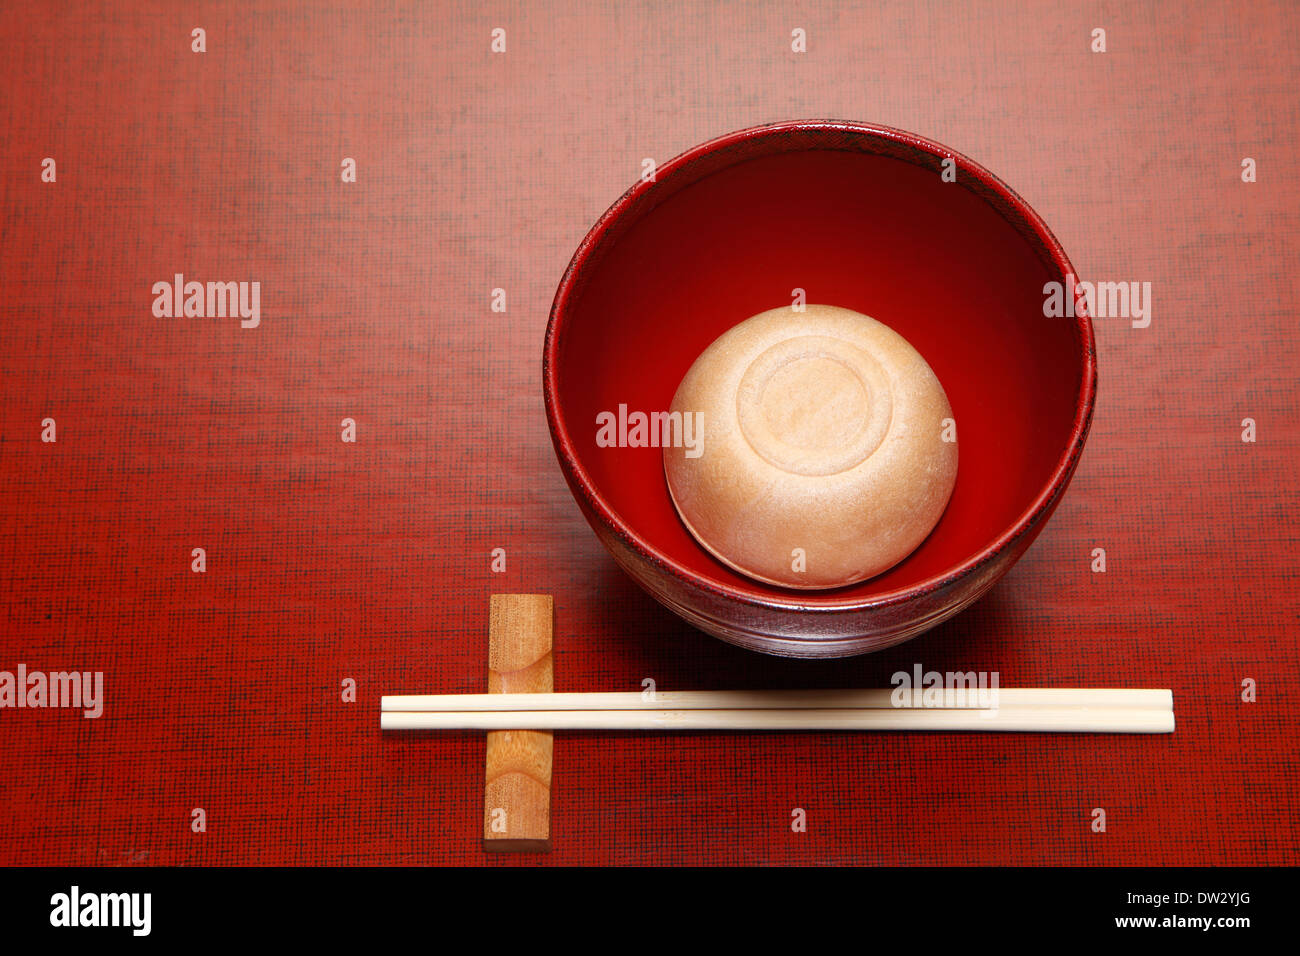 Japanese style red beans soup Stock Photo